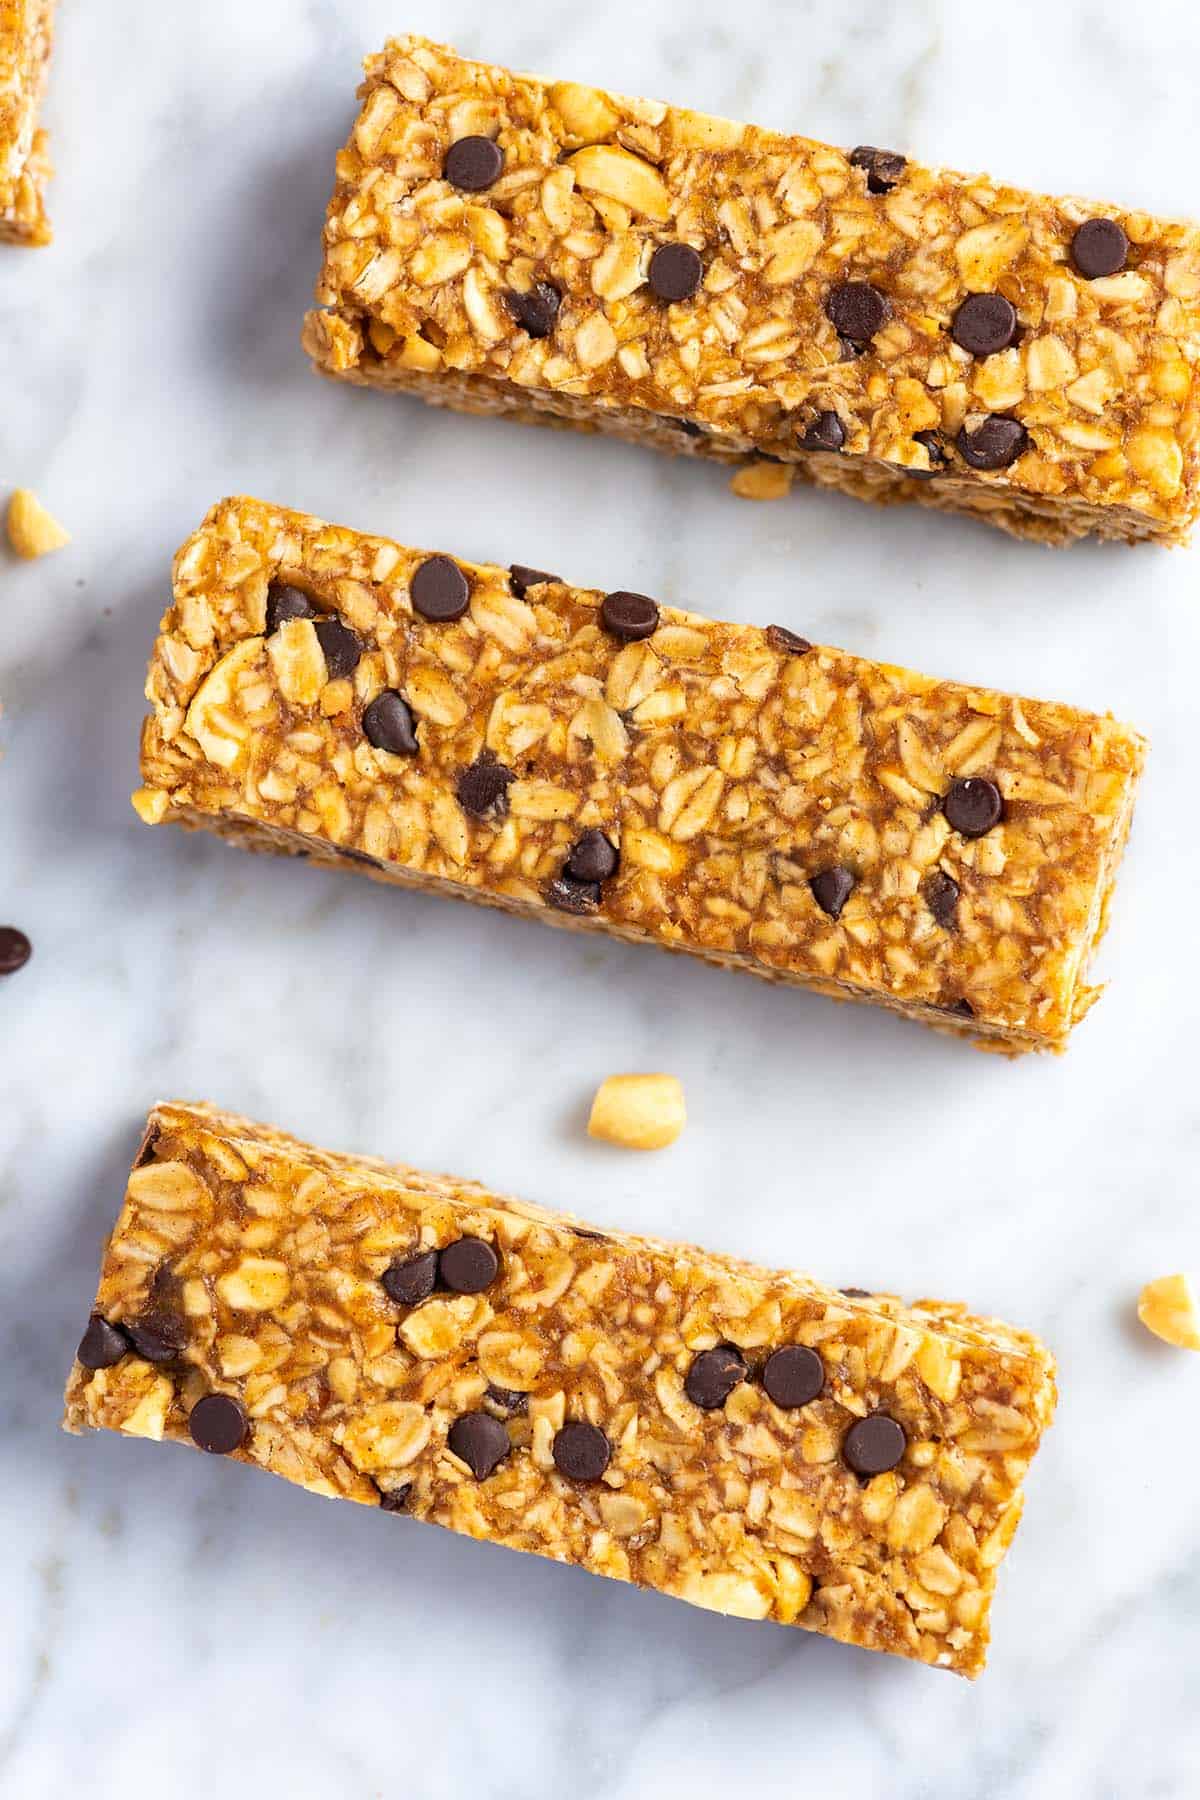 3 homemade granola bars made with peanut butter and chocolate chips